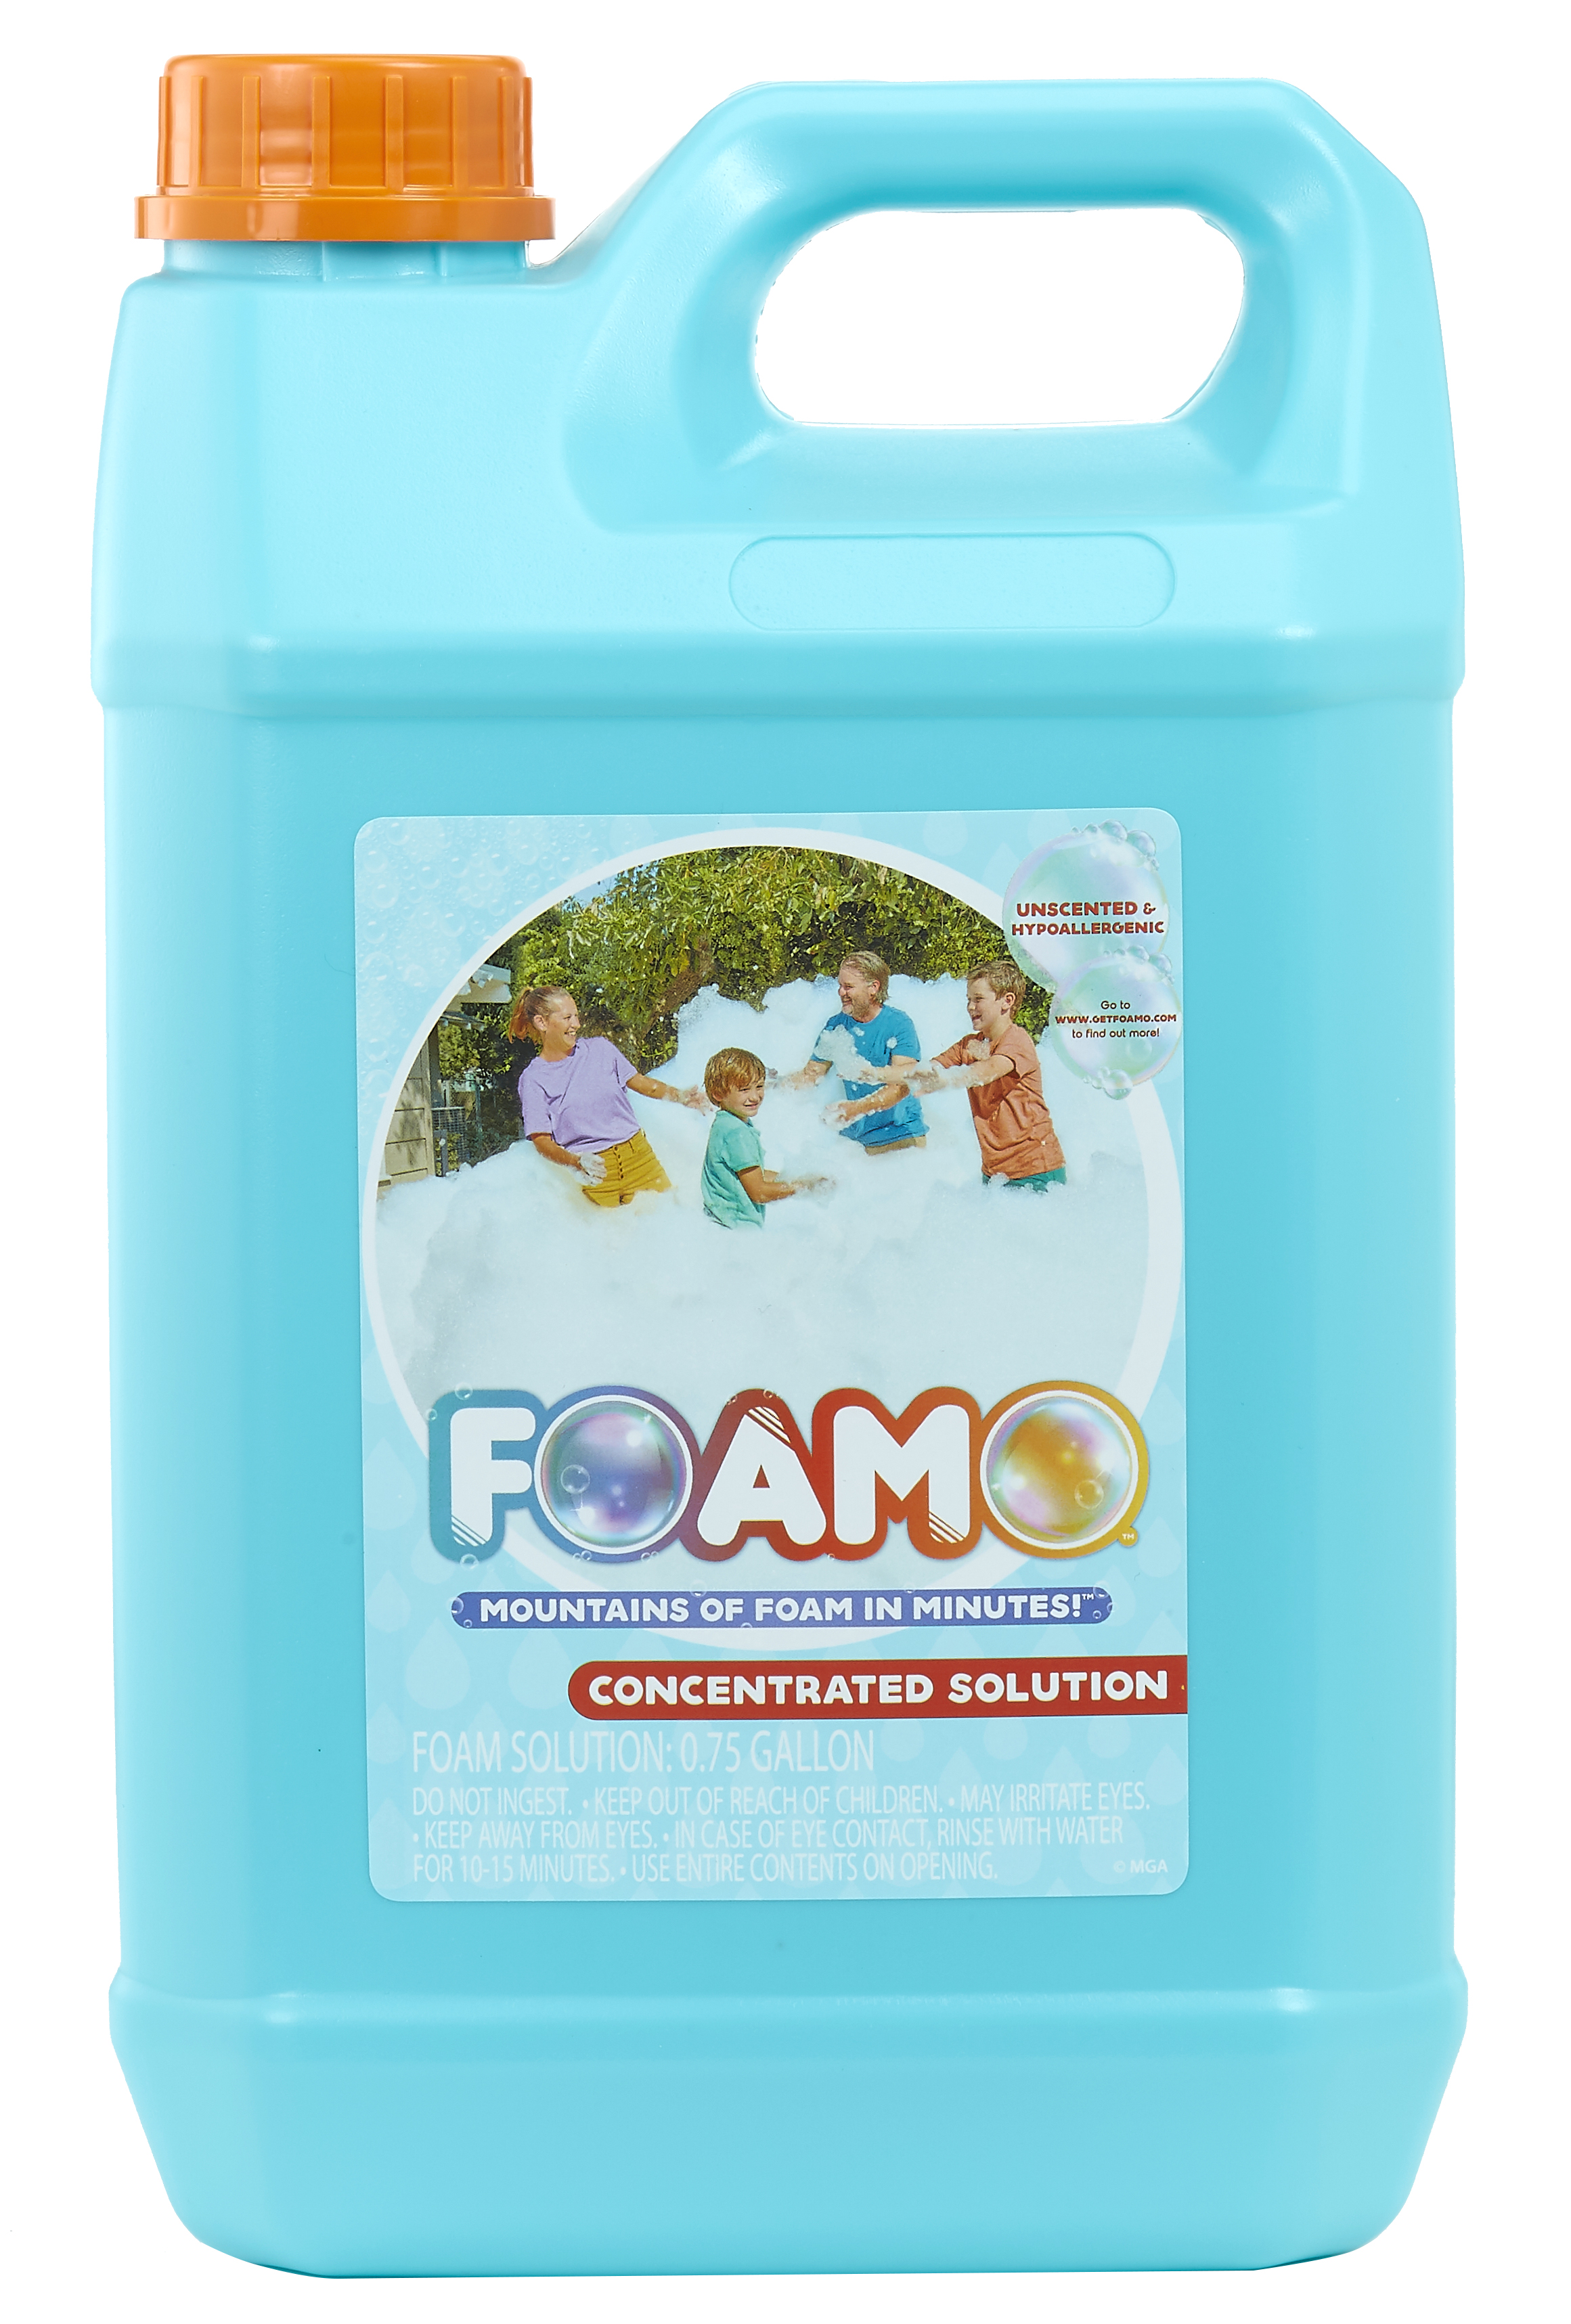 Little Tikes FOAMO Refill Solution for the FOAMO Foam Bubble Machine, Just Add Water, Hypoallergenic and Non-Toxic Party Fun for Kids and Adults - image 1 of 10